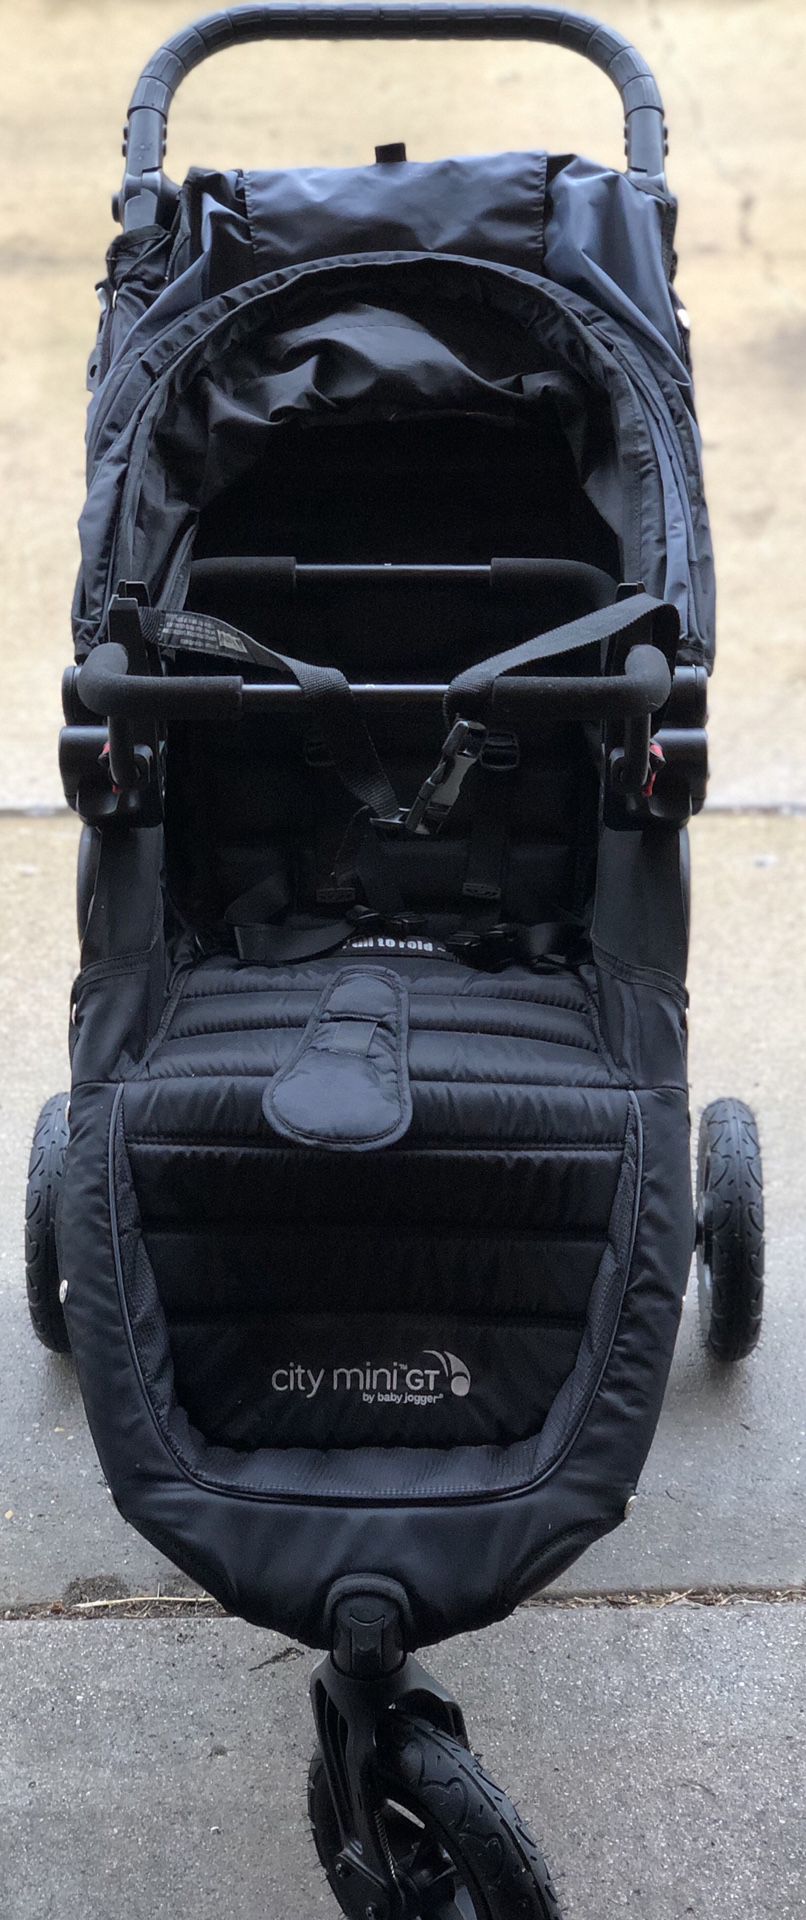 $100. City Mini GT Stroller By by baby jogger with car seat adapter